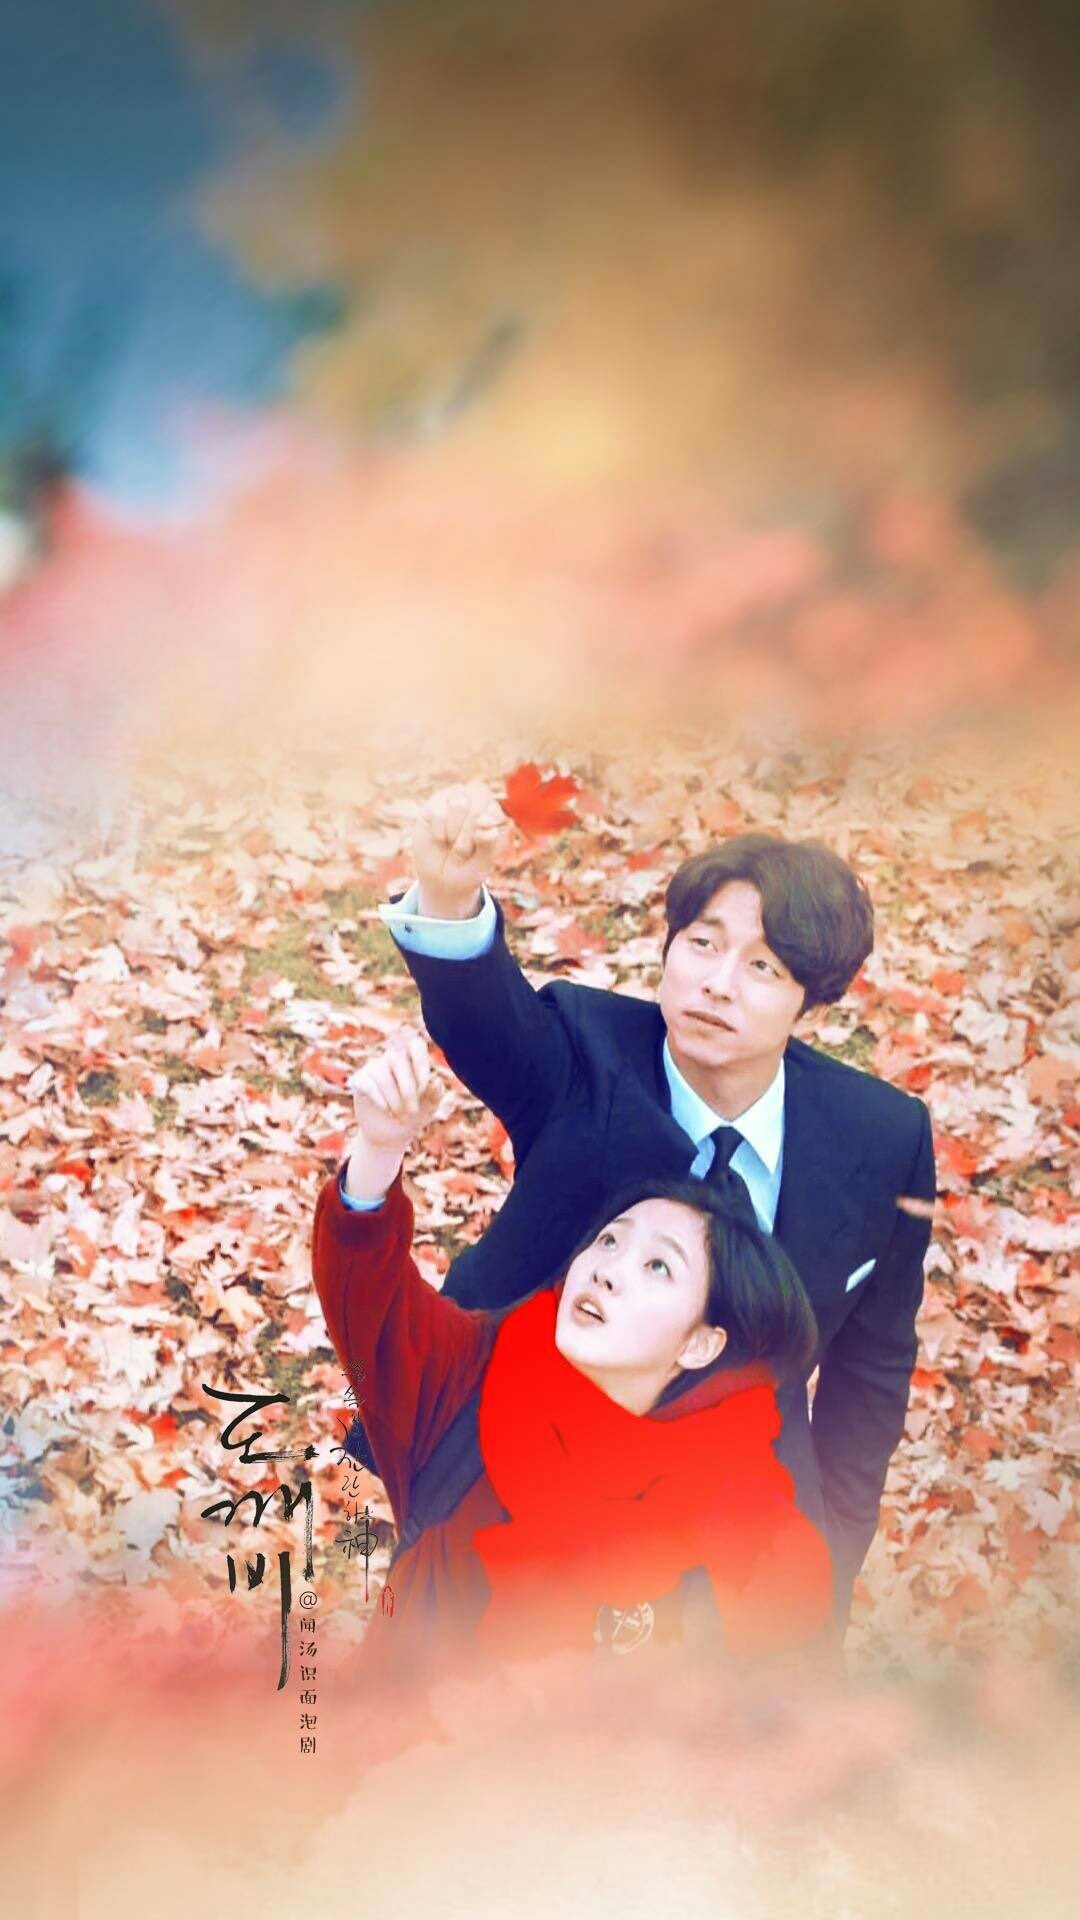 1080x1920 (Goblin) Every moment I spent with you. A quote from kdrama Goblin  (Guardian: The Lonely and Great God)